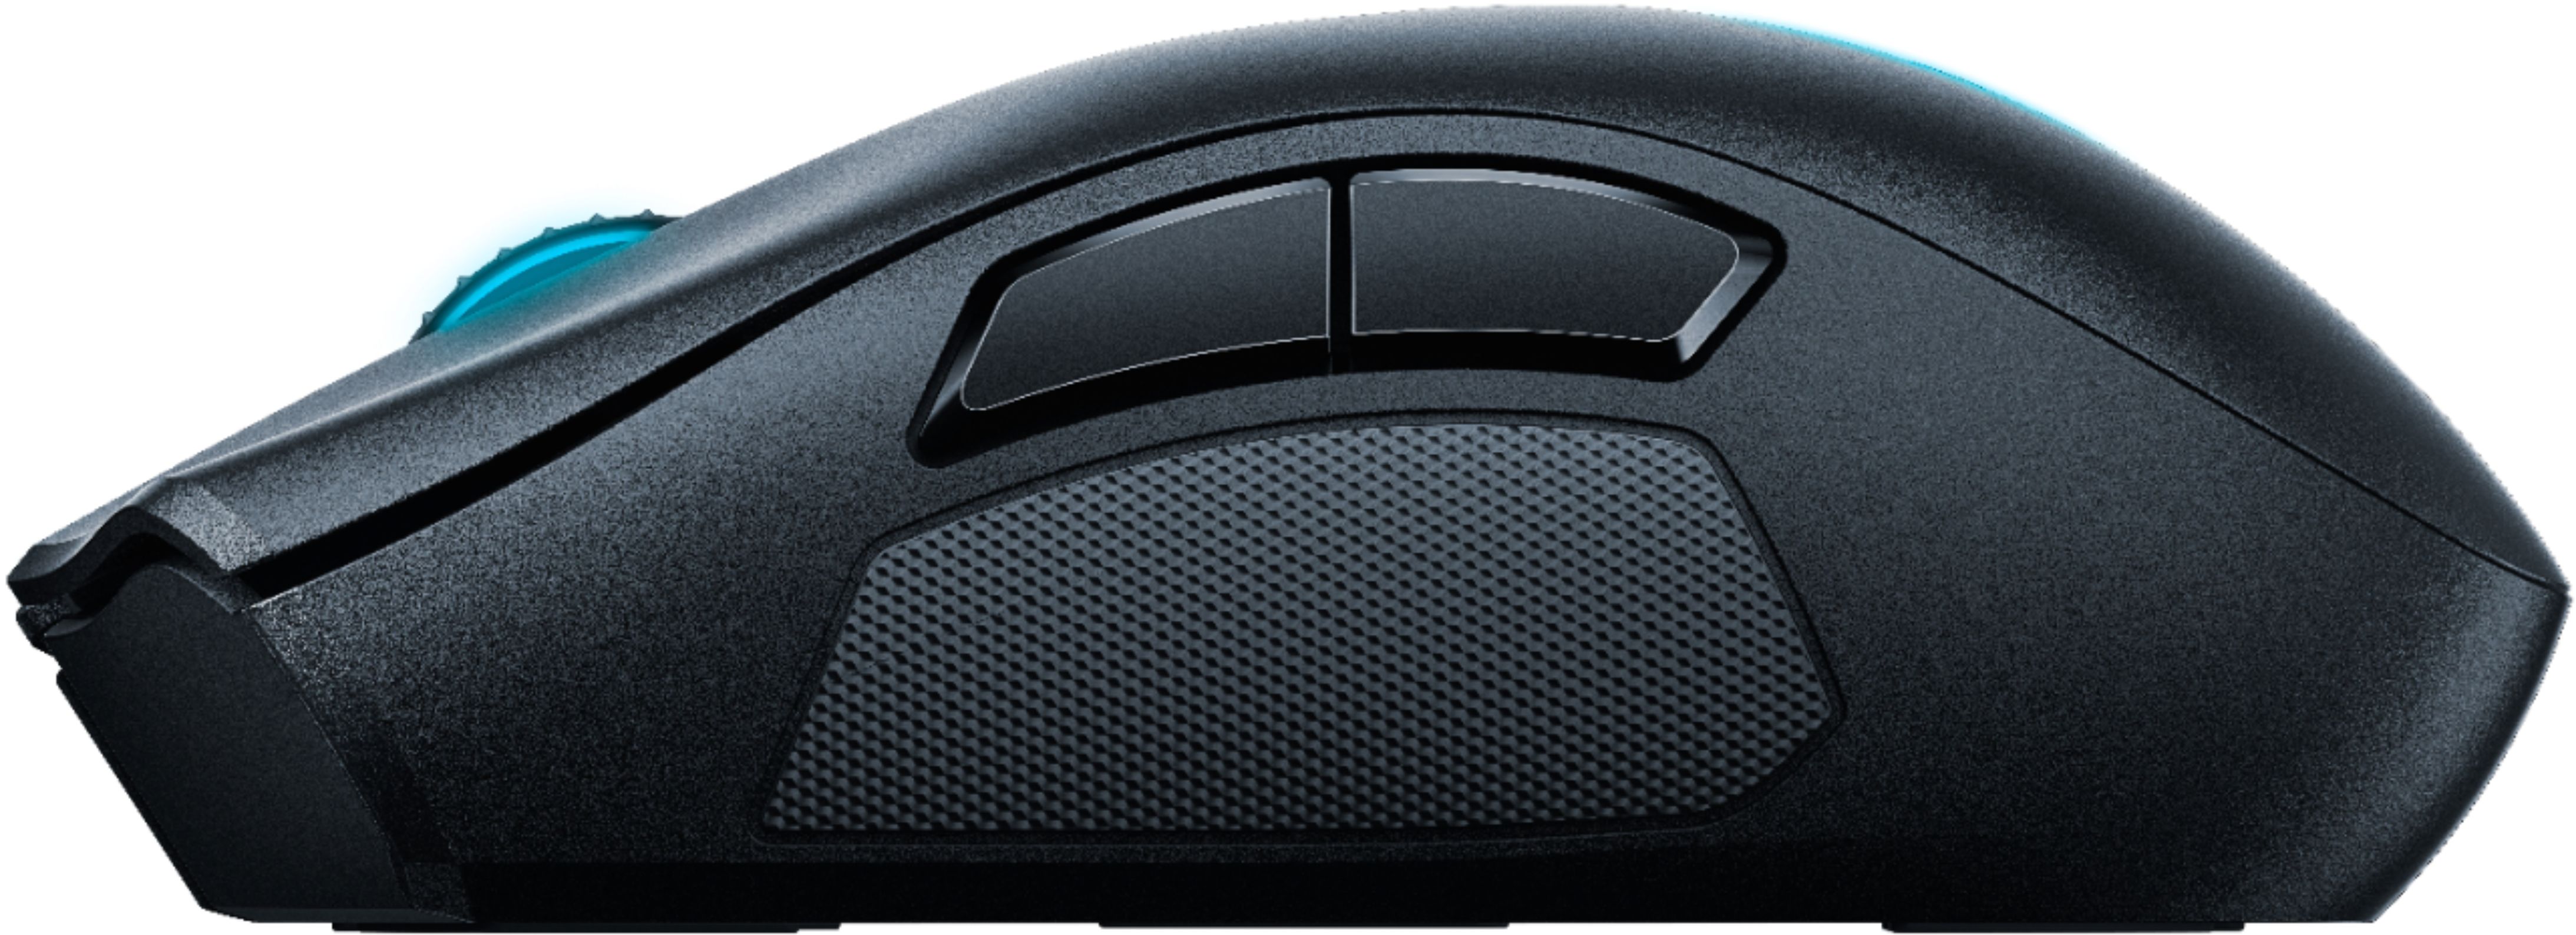 Razer Naga Pro Wireless Optical Gaming Mouse with Interchangeable Side Plates in 2, 6, 12 Button Configurations